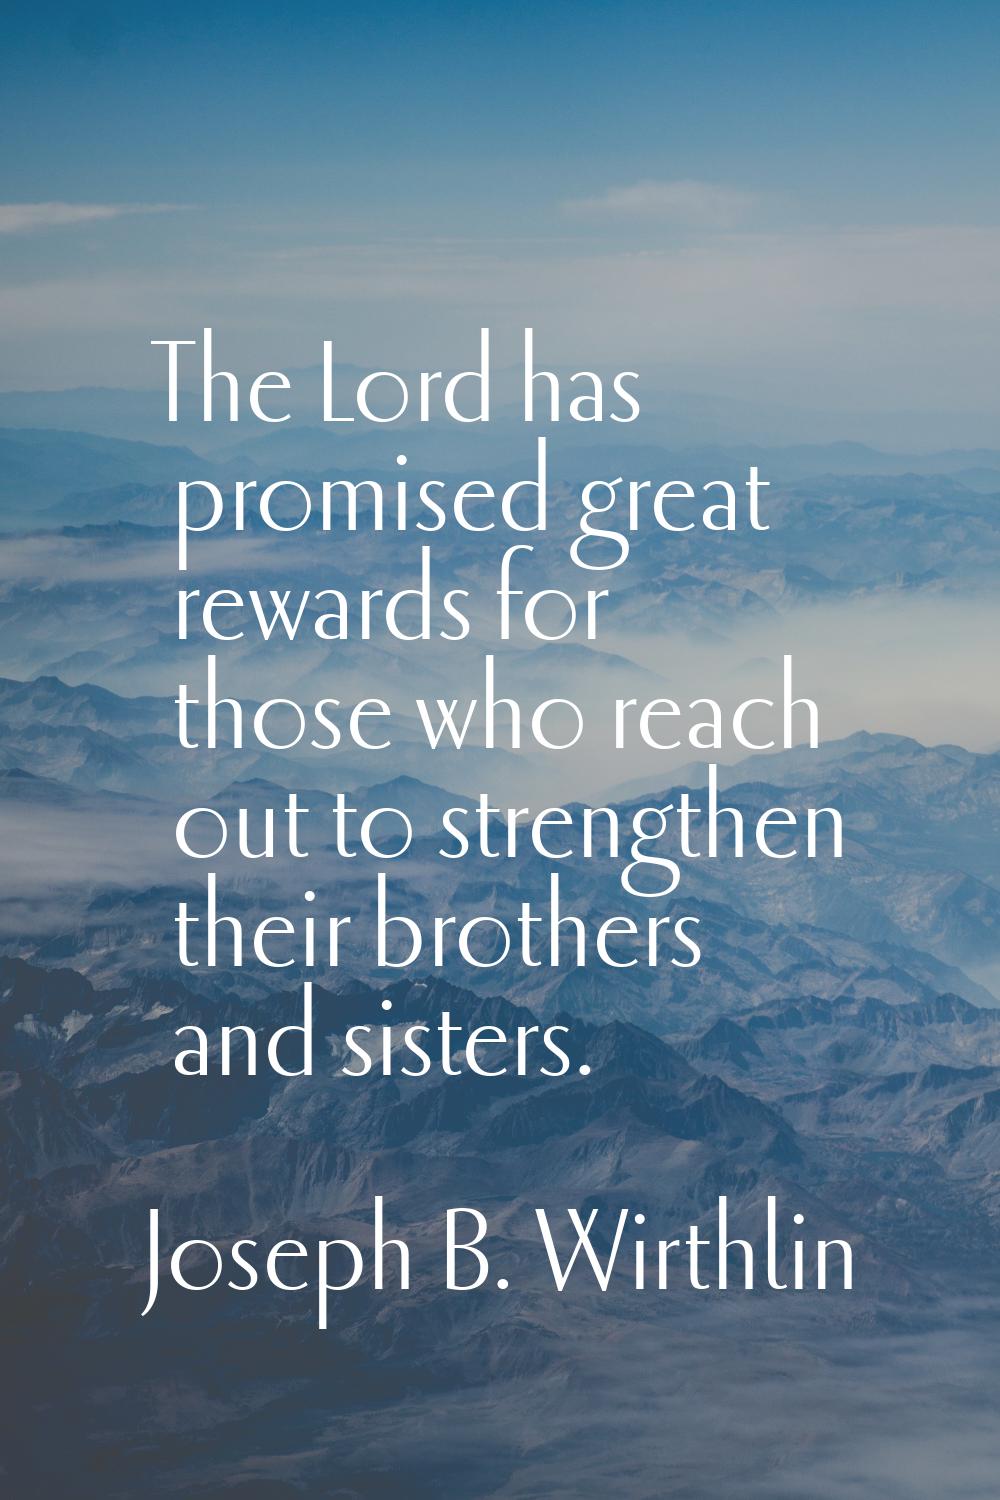 The Lord has promised great rewards for those who reach out to strengthen their brothers and sister